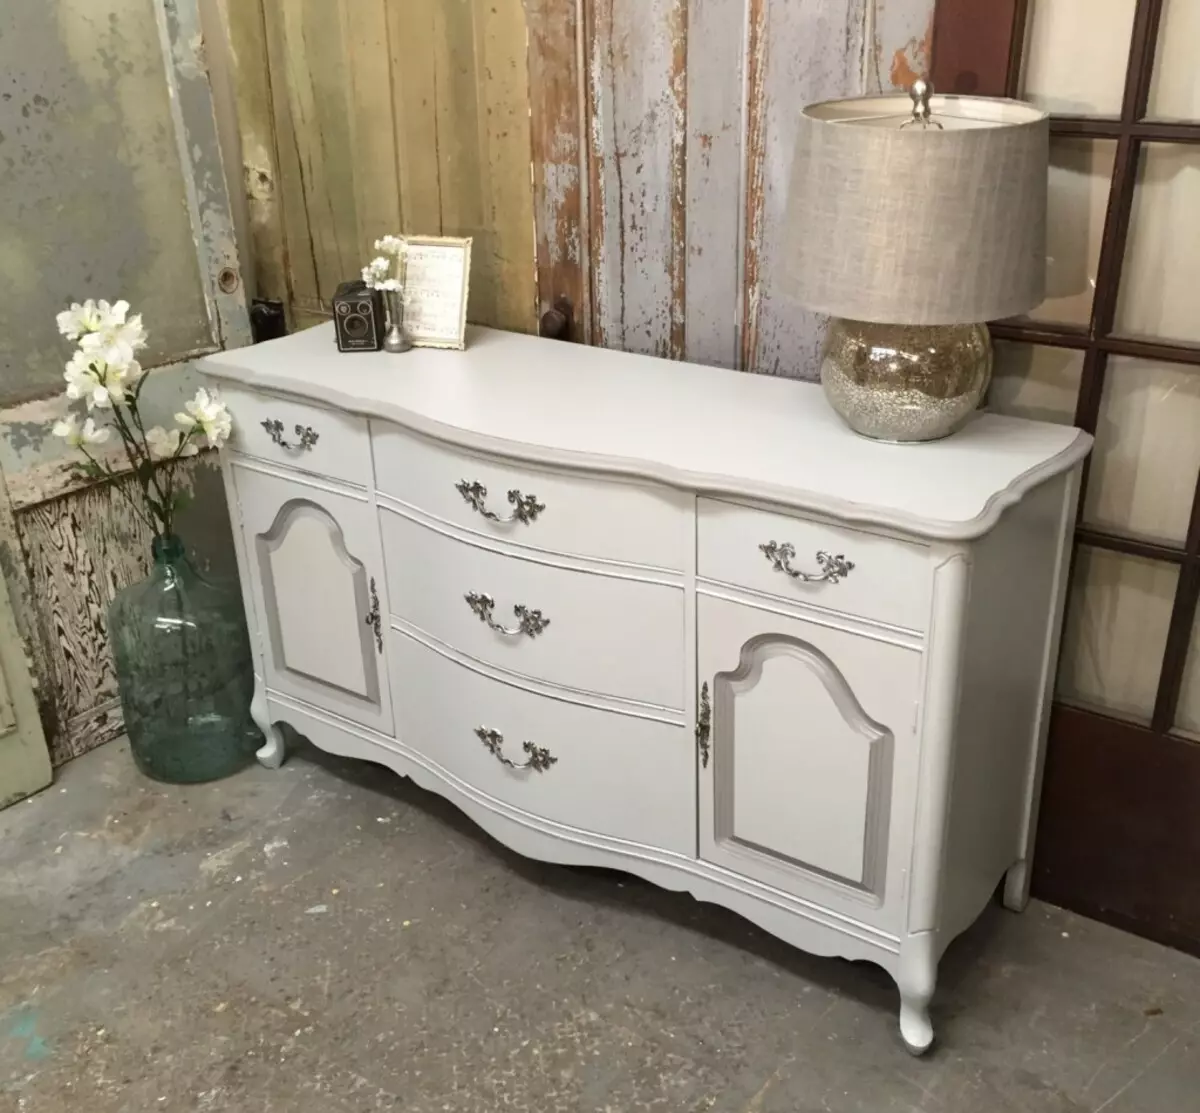 Restoration of the old buffet do it yourself